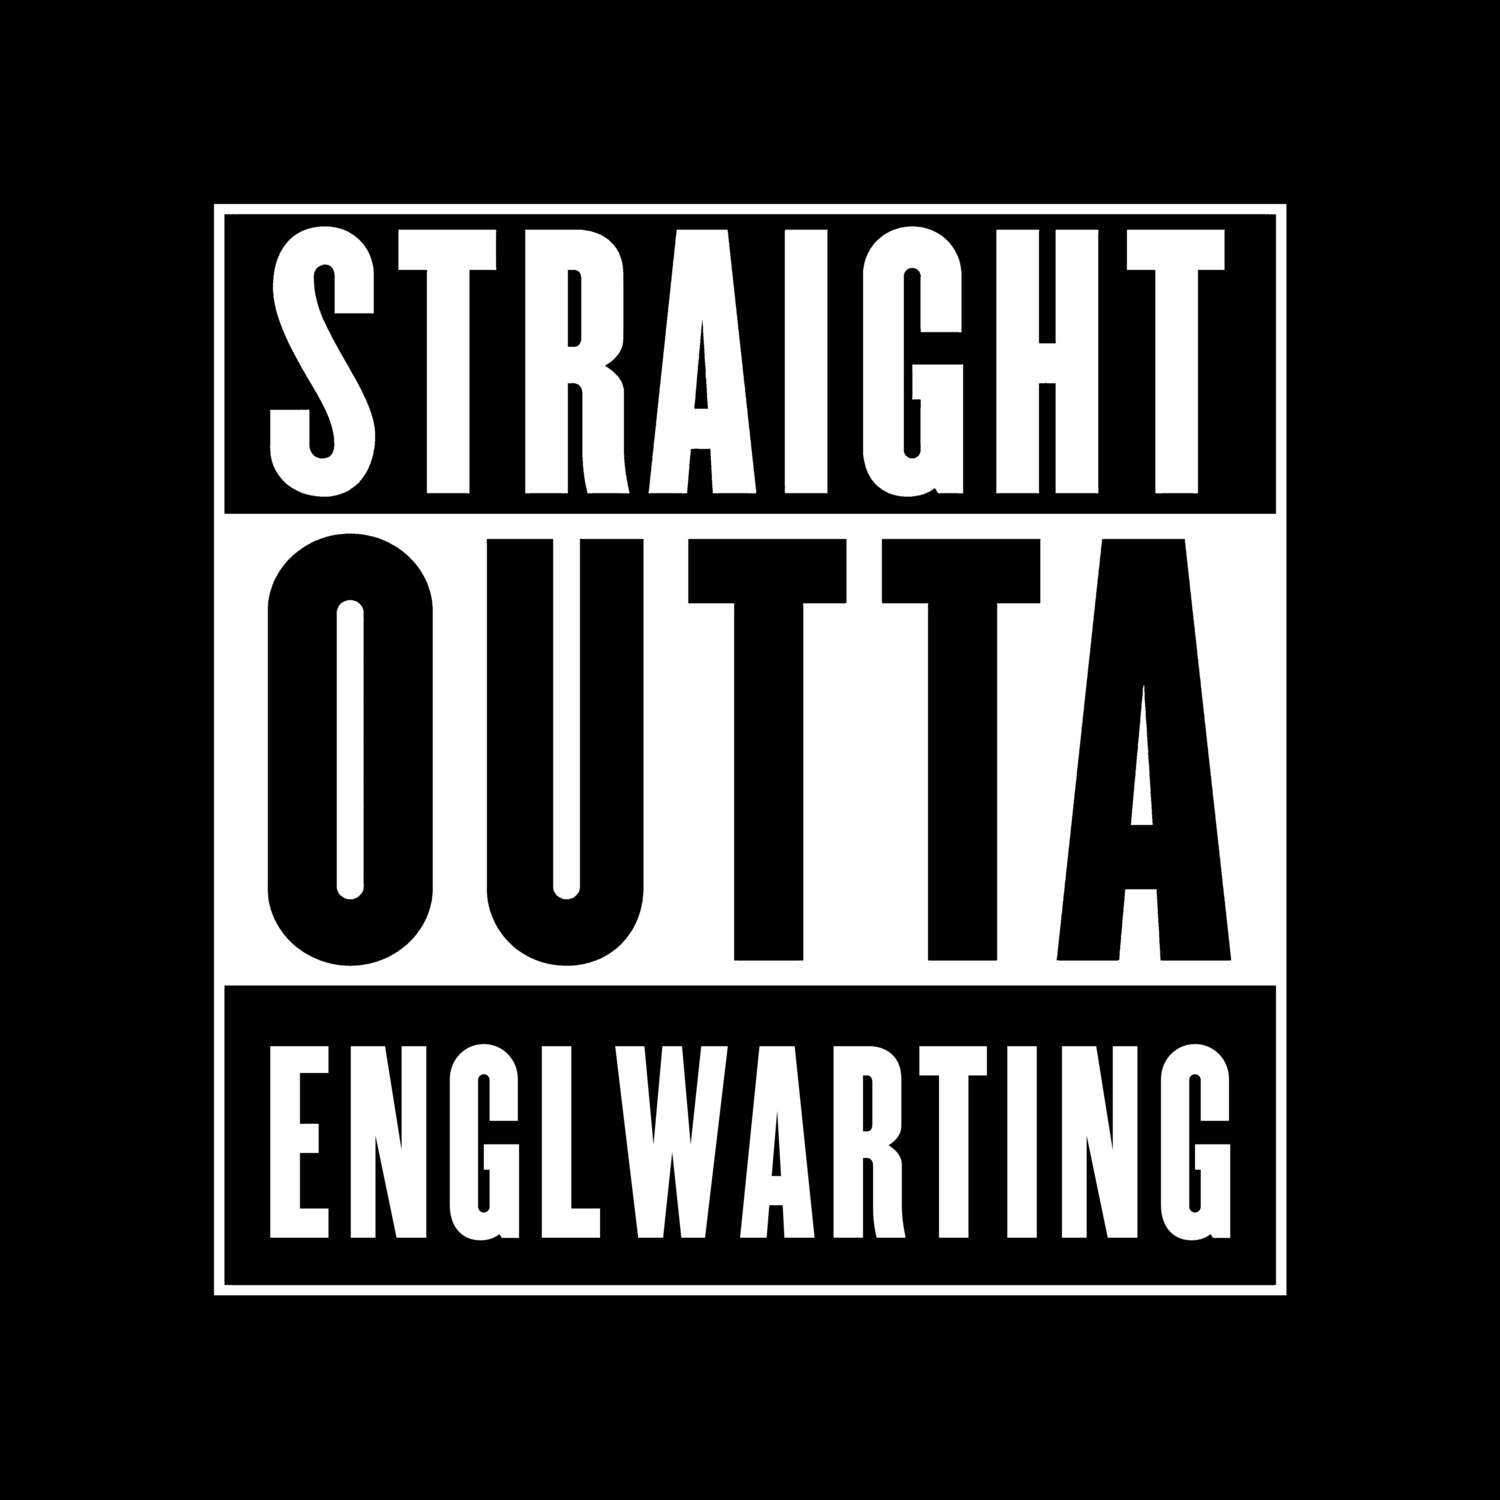 Englwarting T-Shirt »Straight Outta«